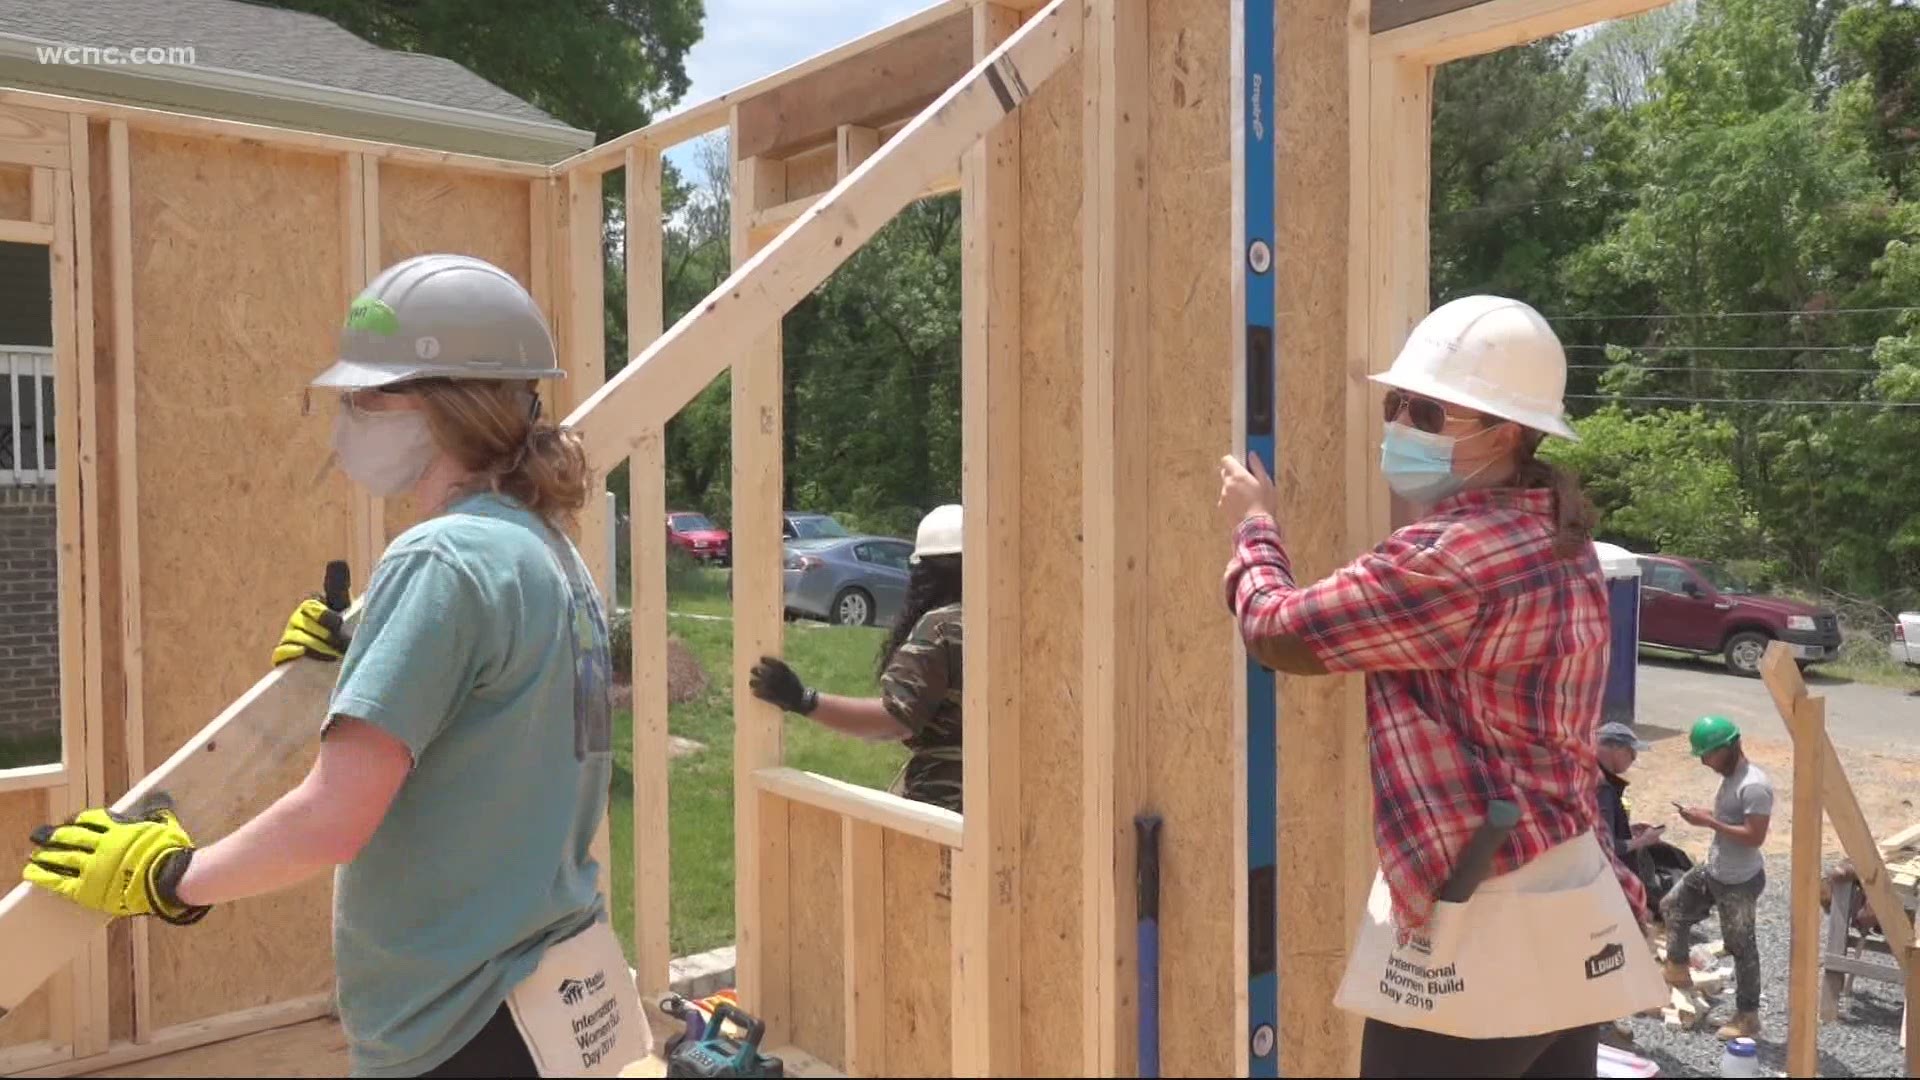 Taneesha Gleaton and volunteers with “Women Build” rolled up their sleeves on Saturday to continue work on a Habitat for Humanity House.